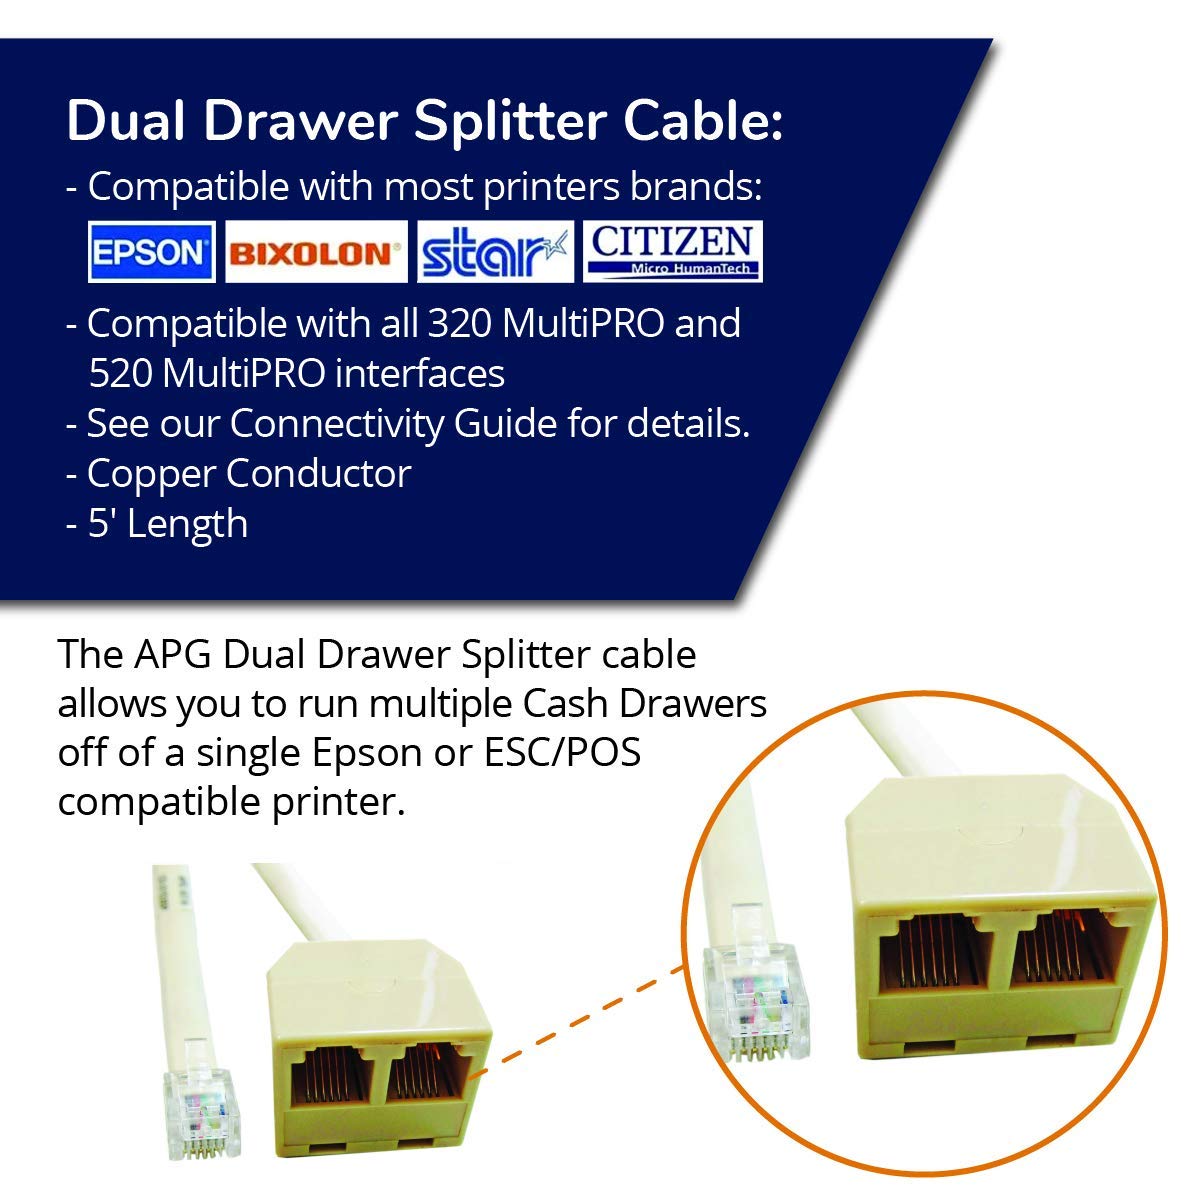 APG CD-D1D2EP Dual Drawer RJ-12 Male Splitter Cable for Epson Printers CDD1D2EP - image 2 of 7